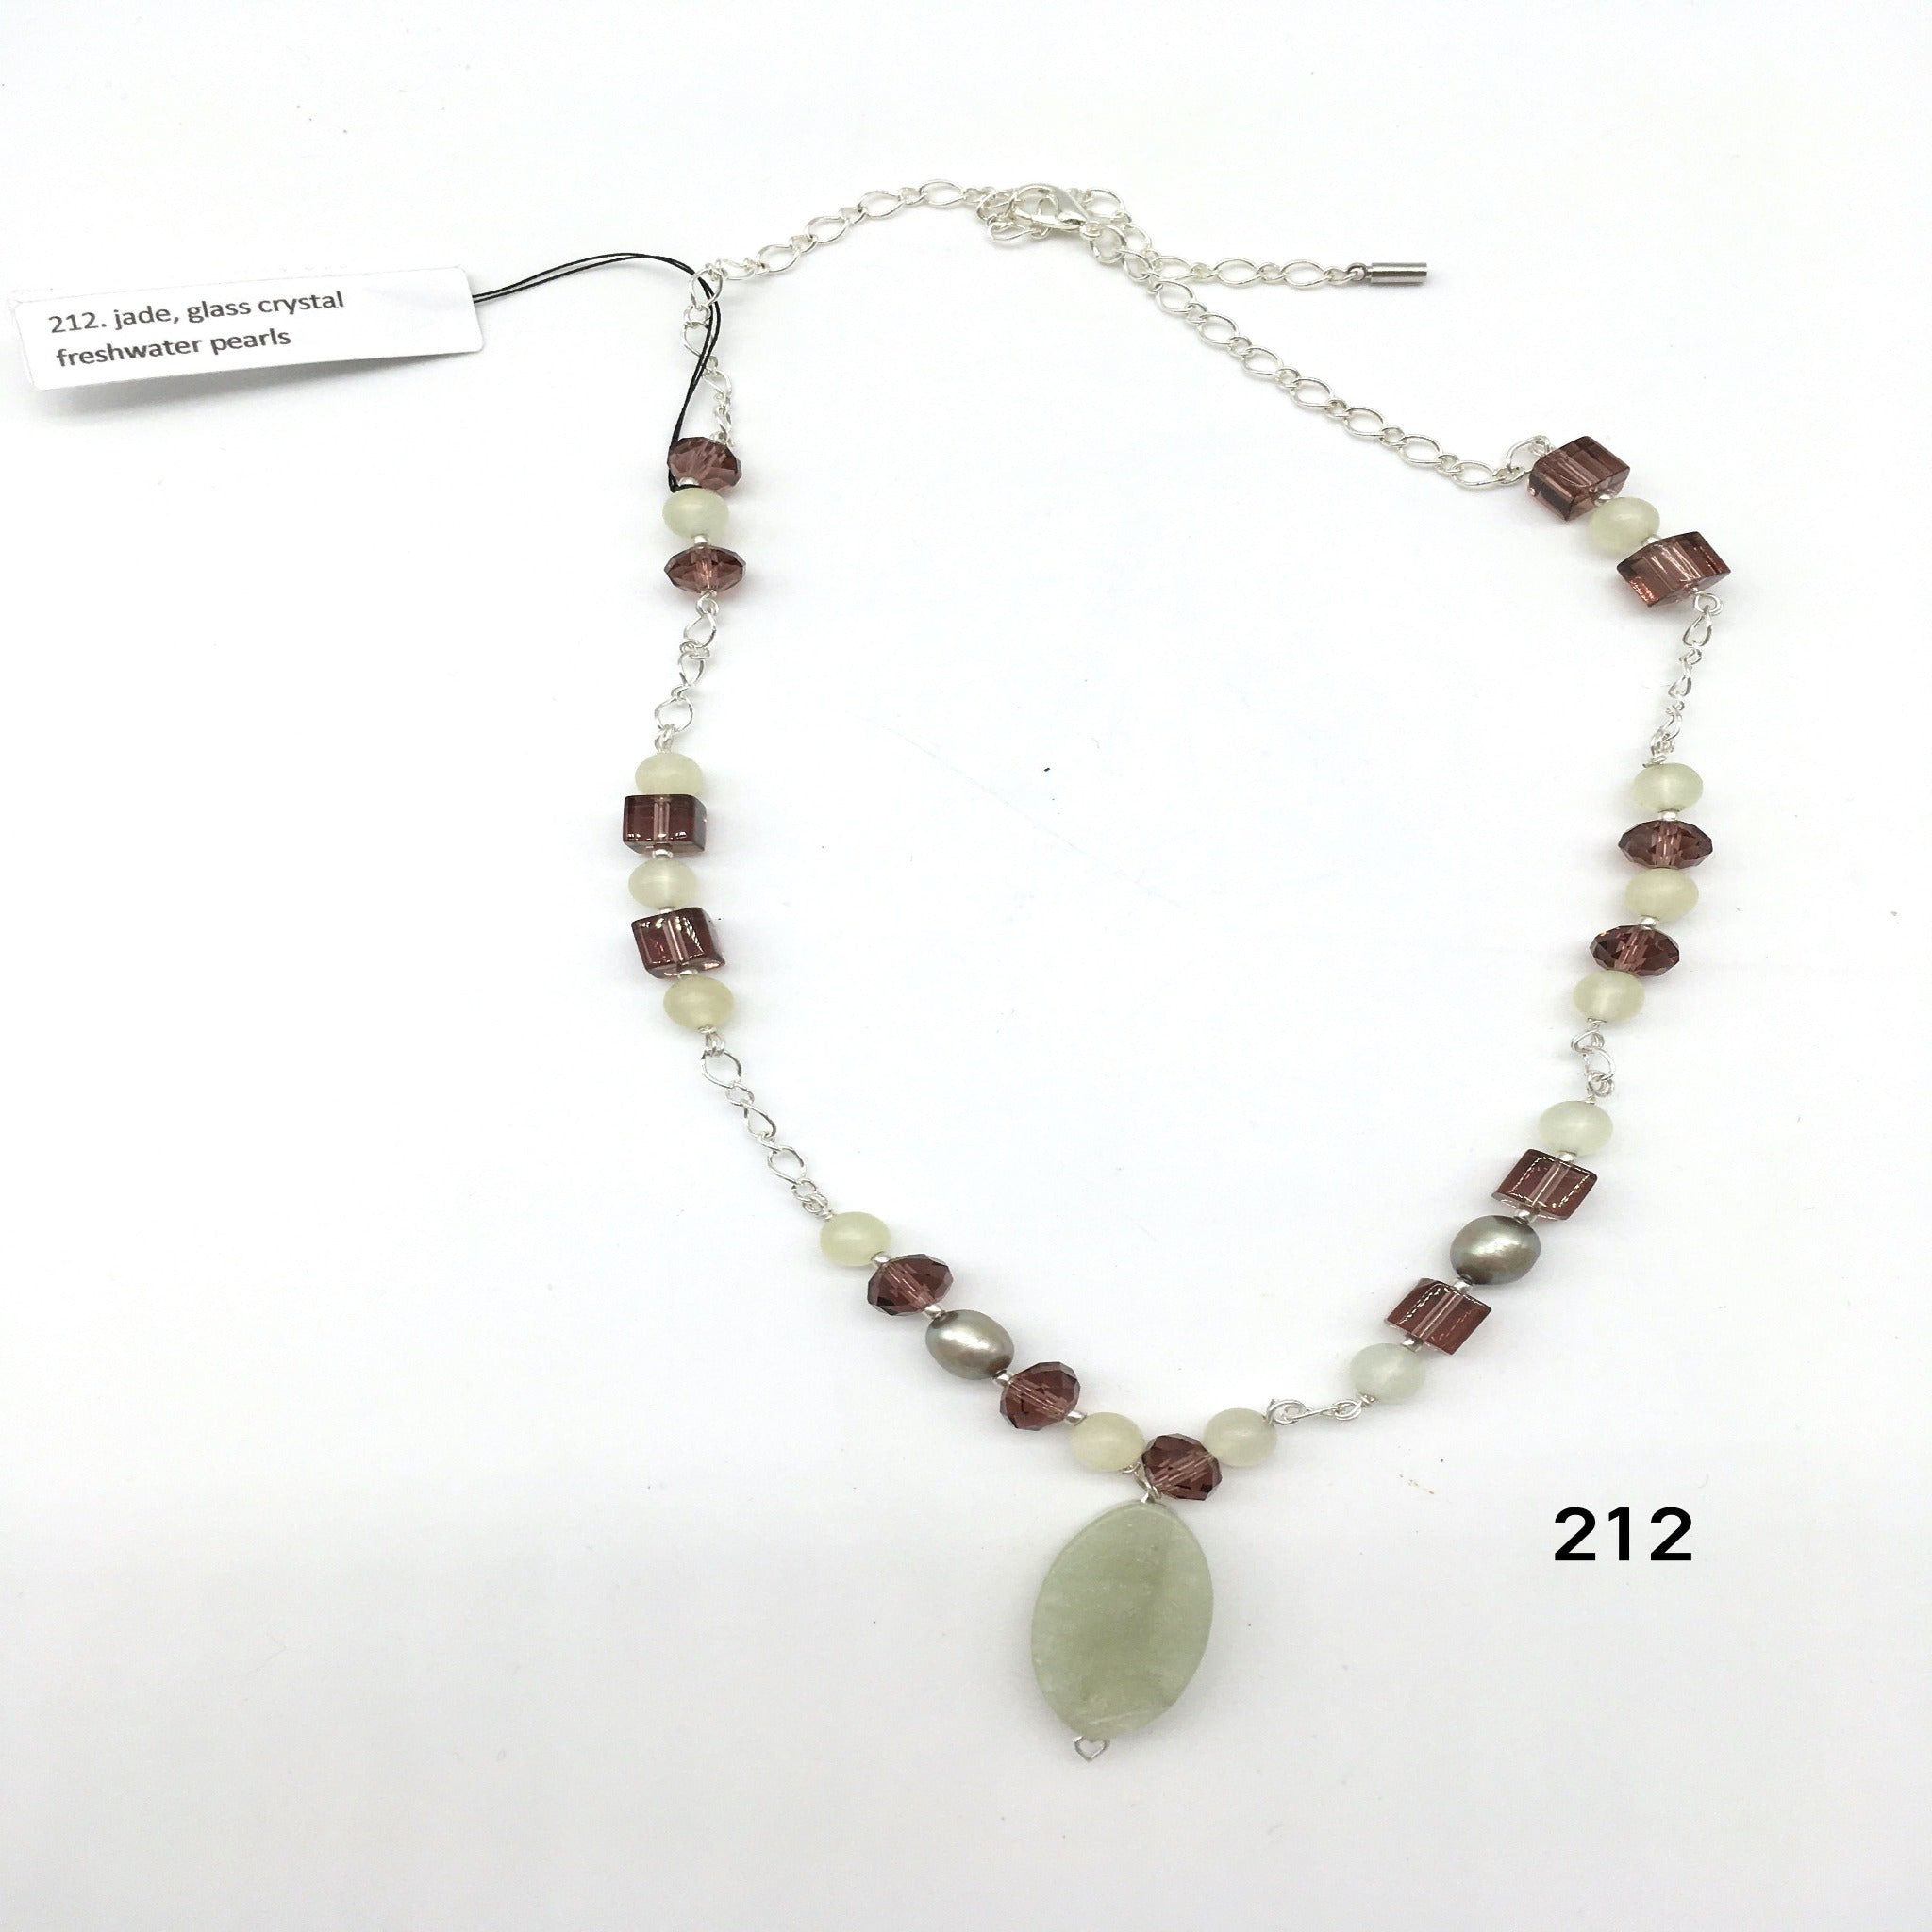 Jade, glass crystal freshwater pearls created by Dorothea Drew Design in central NJ